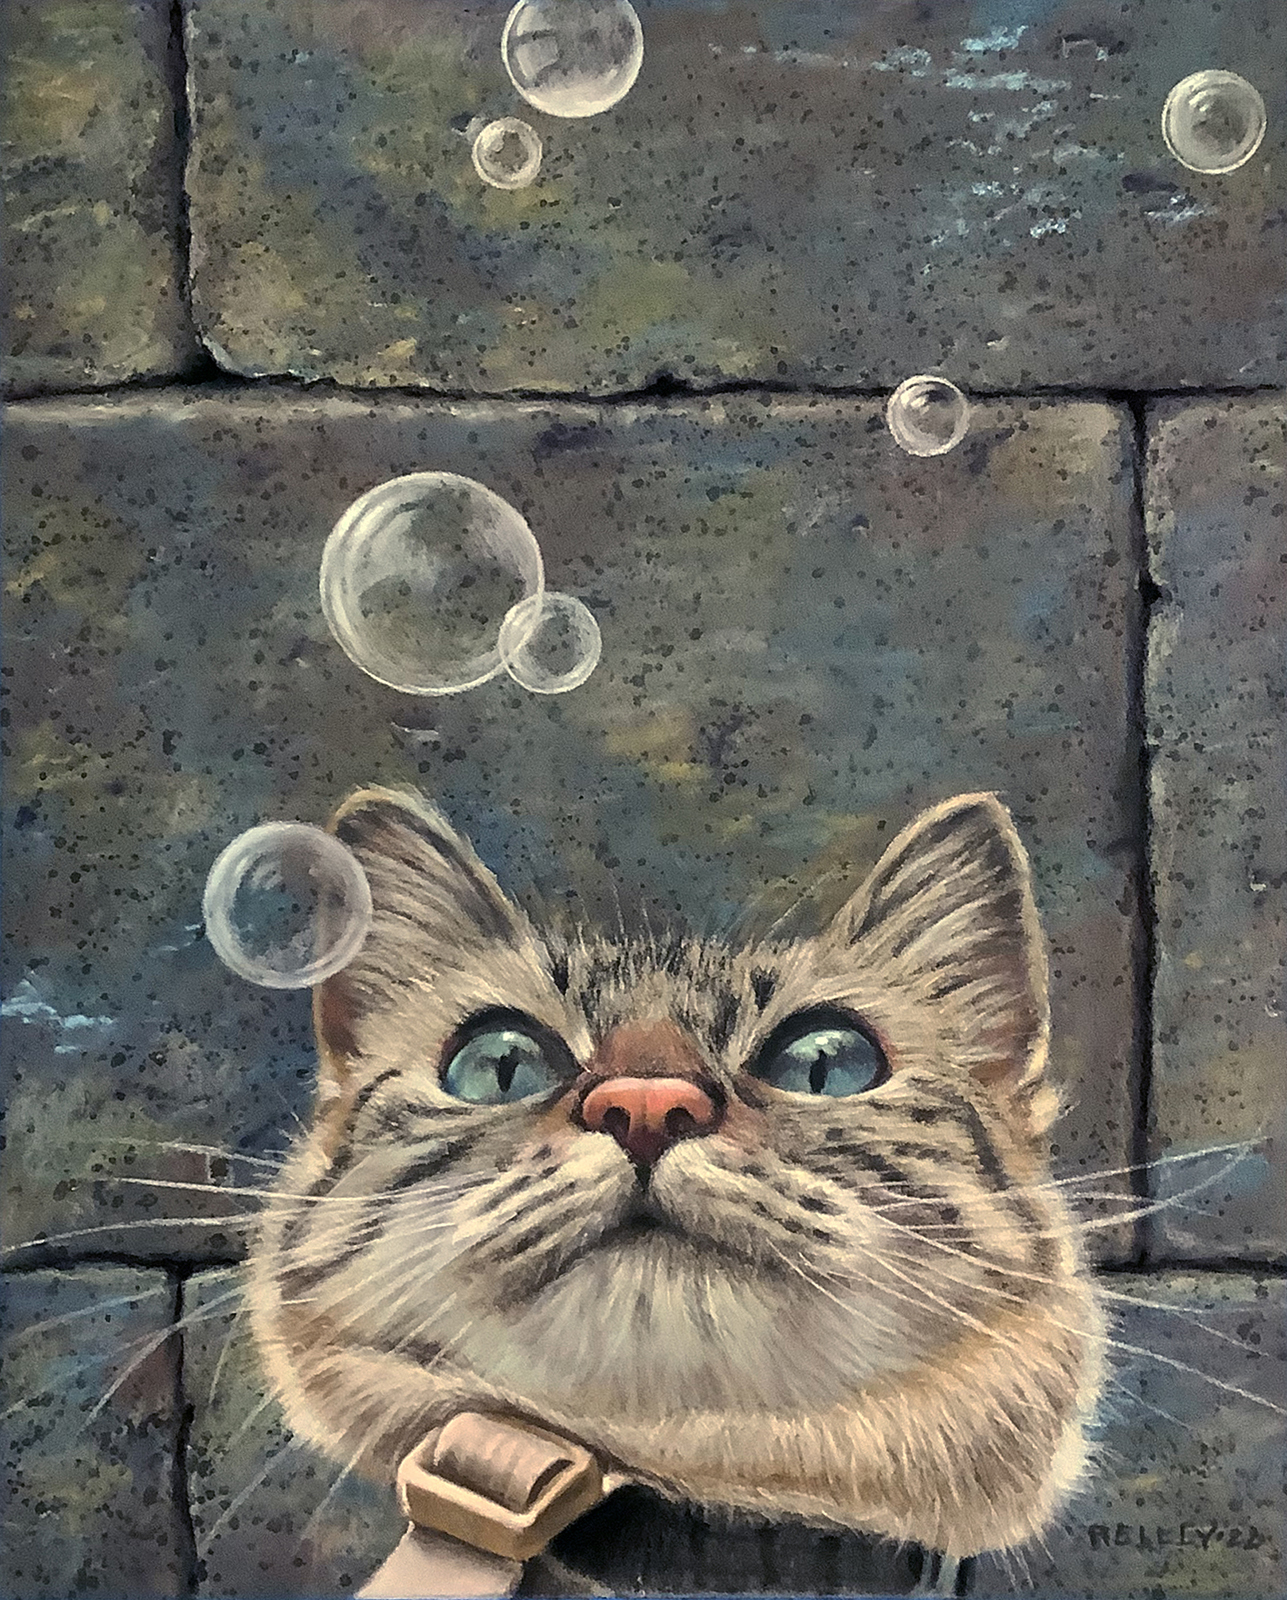 Tim Reilly, "Bubbles," pastel on paper, 14 x 11 in 